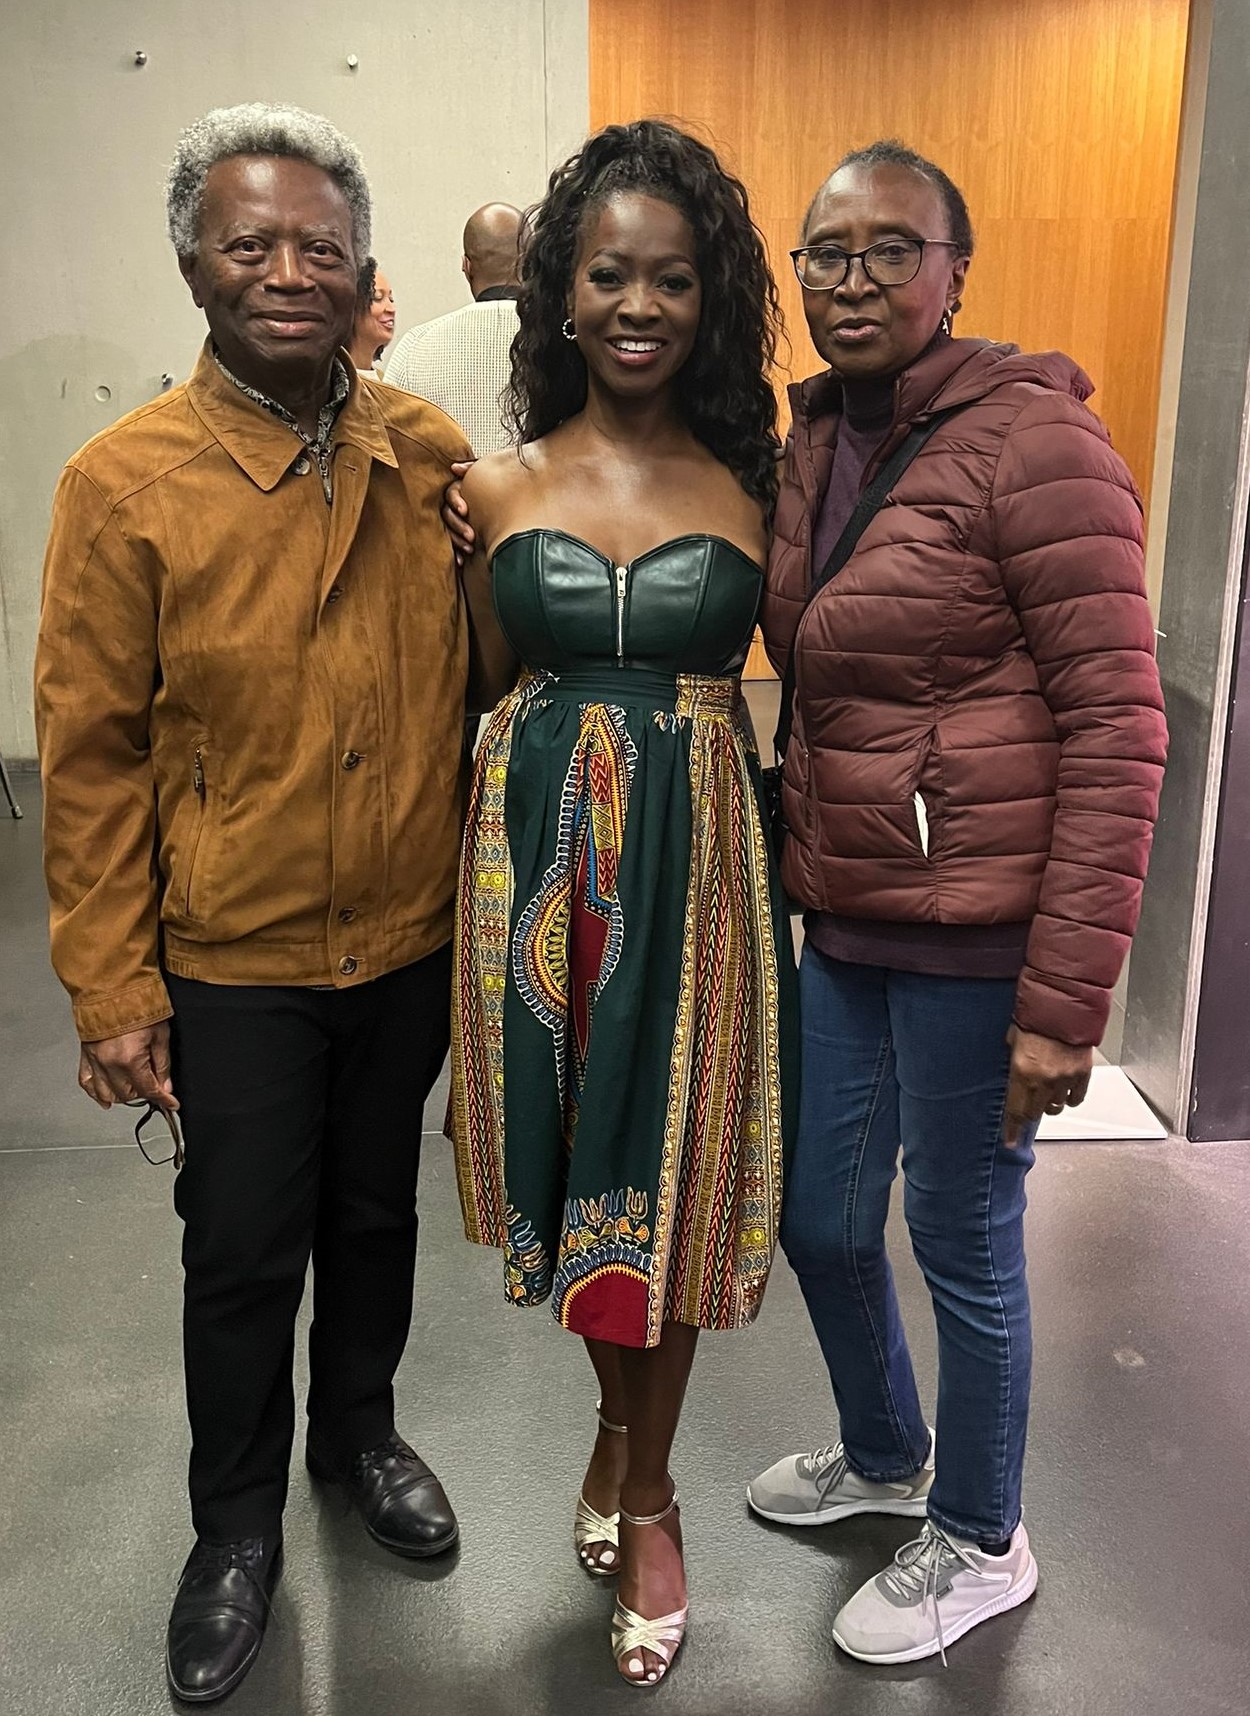 An Enjoyable and Soulful Evening with Azania Noah—the talented Sierra Leonean Songstress Swiss Watch Passport Described as a ‘Muse Phenomenon’